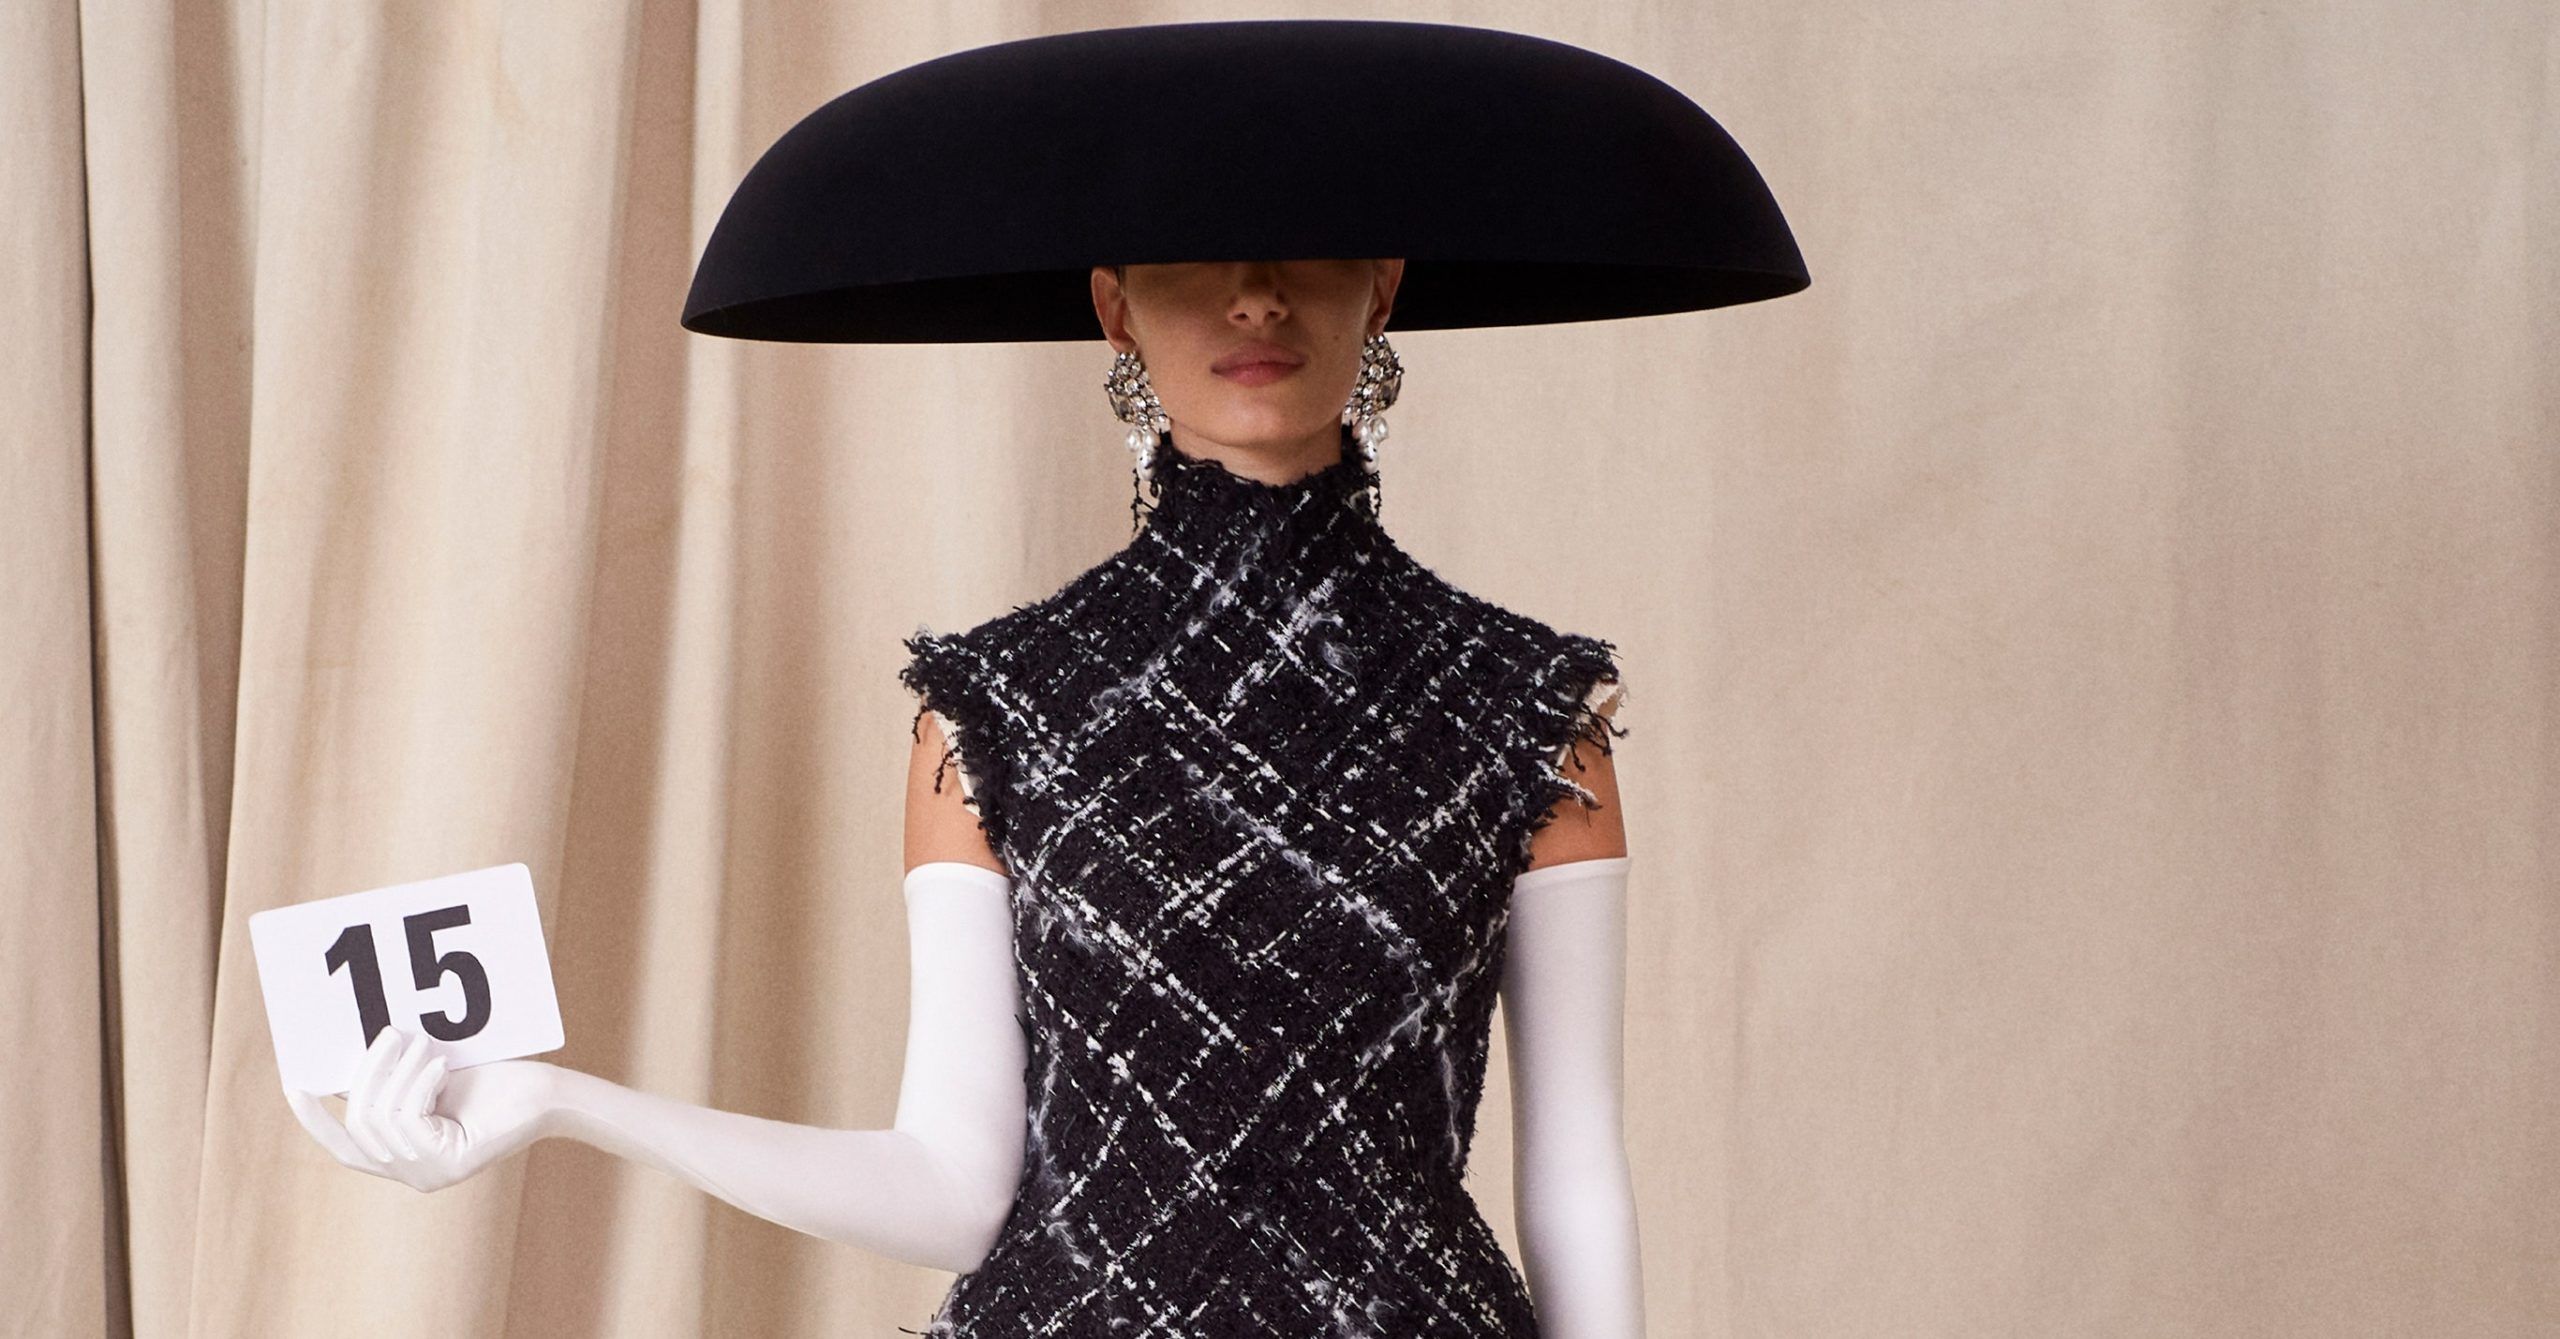 Balenciaga stages its first haute couture fashion show in over years